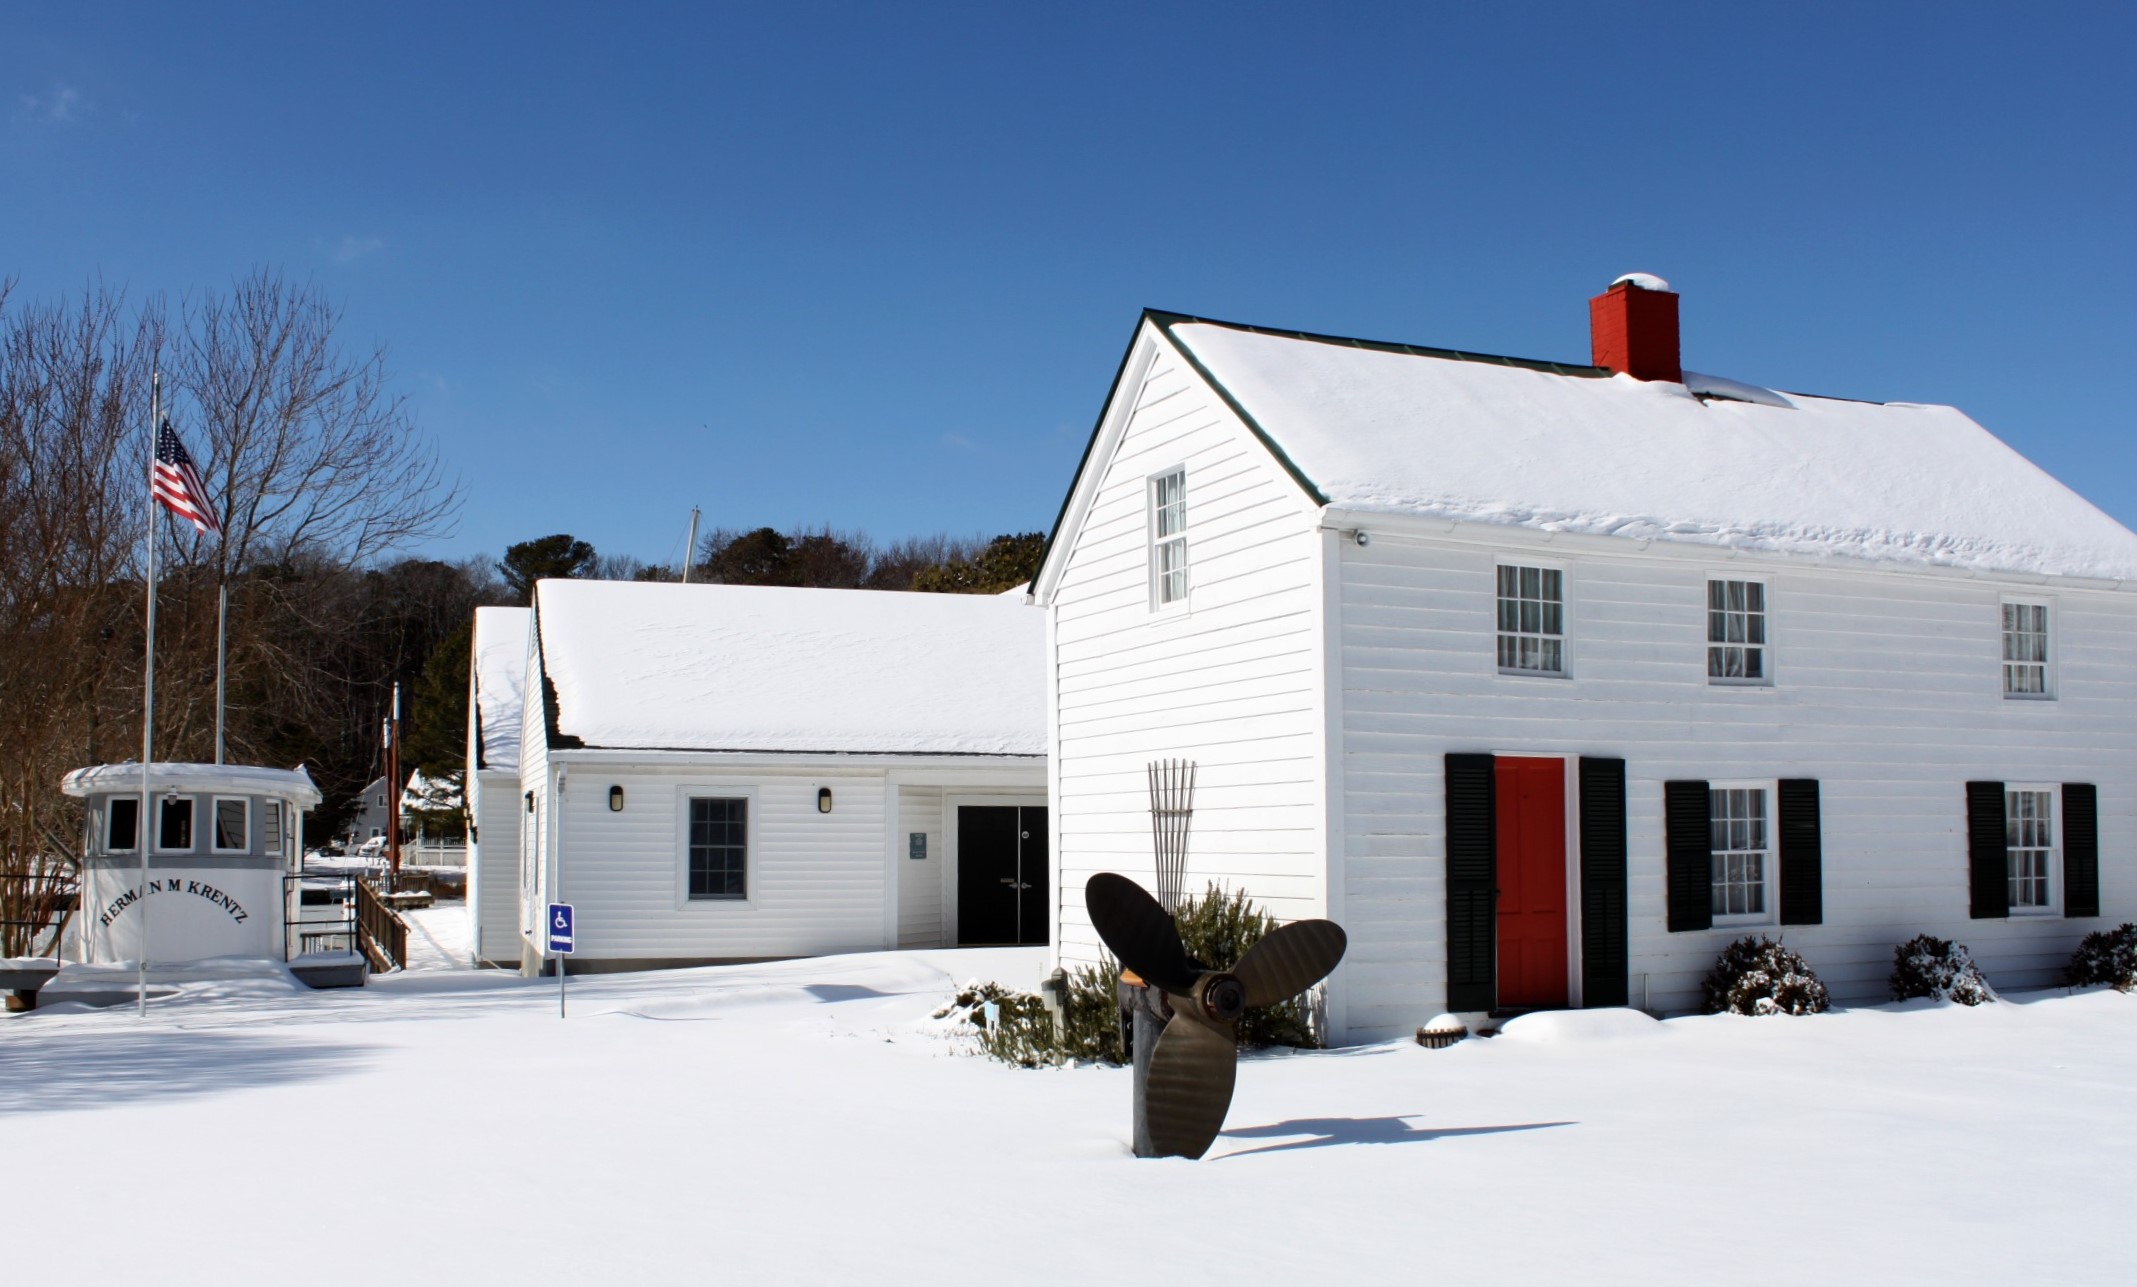 A two story white clapboard house with dark shutters and a chimney and a one story white out building behind it